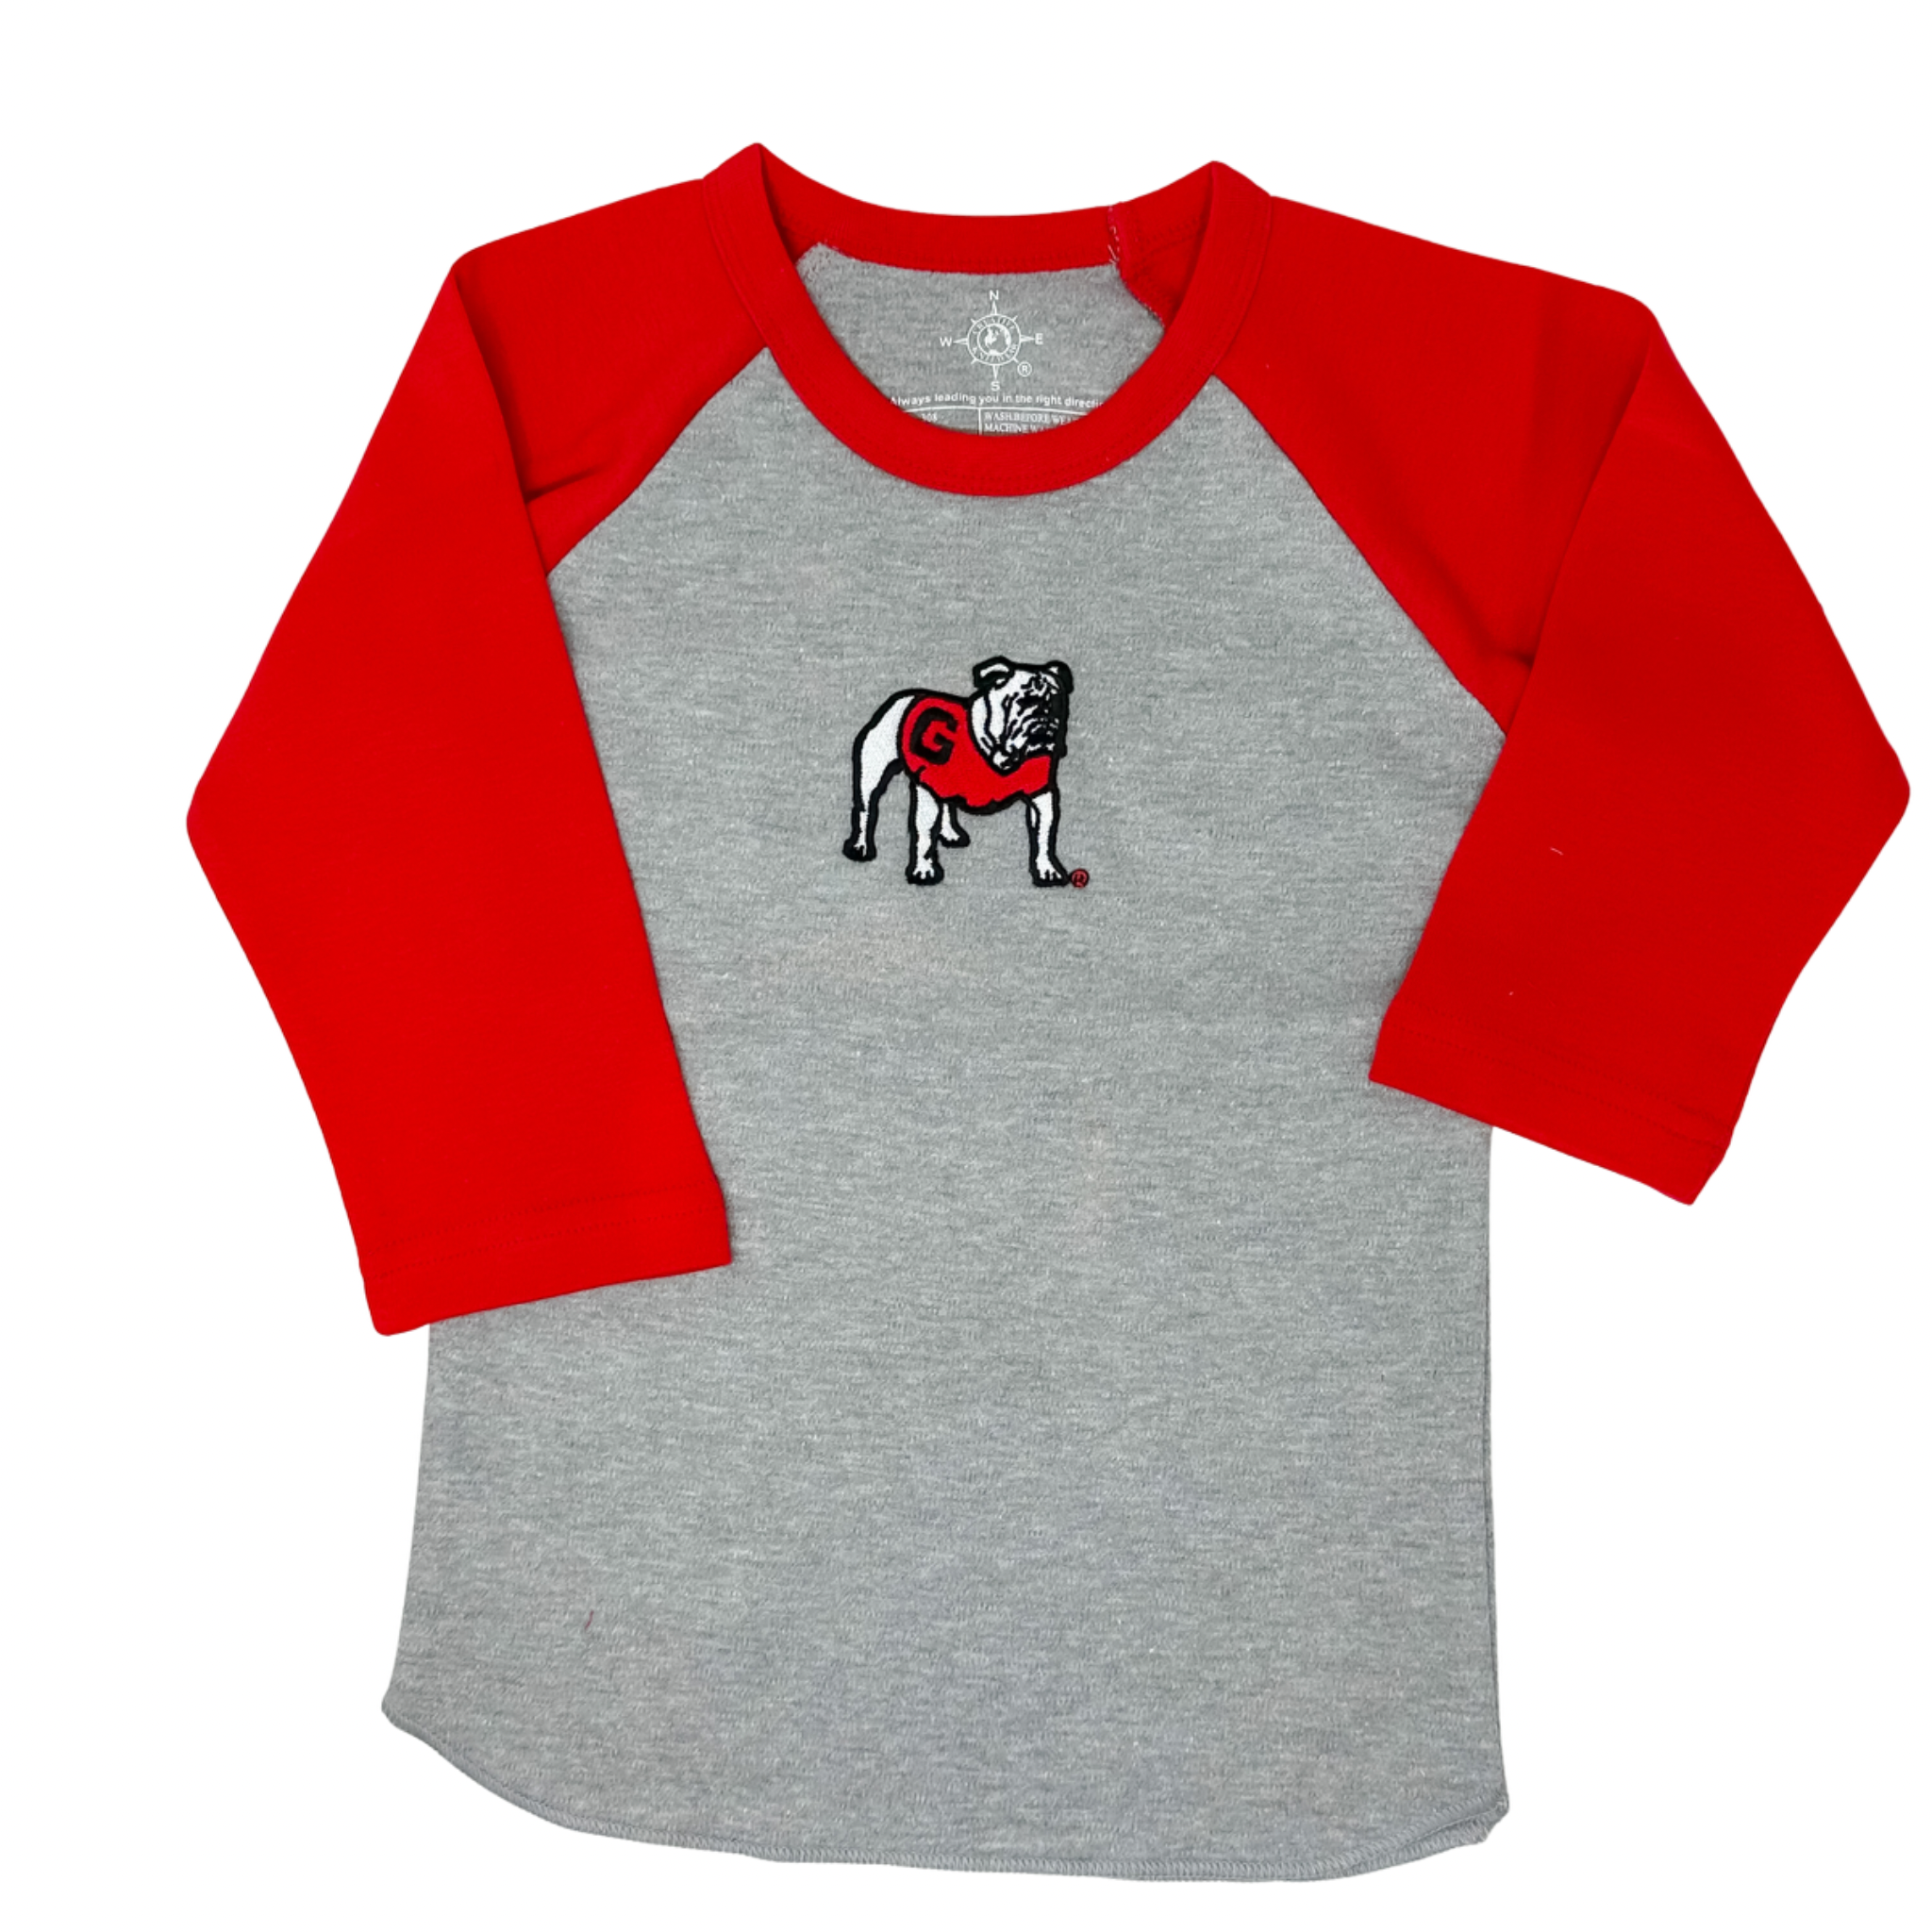  Creative Knitwear University of Louisville Baby and